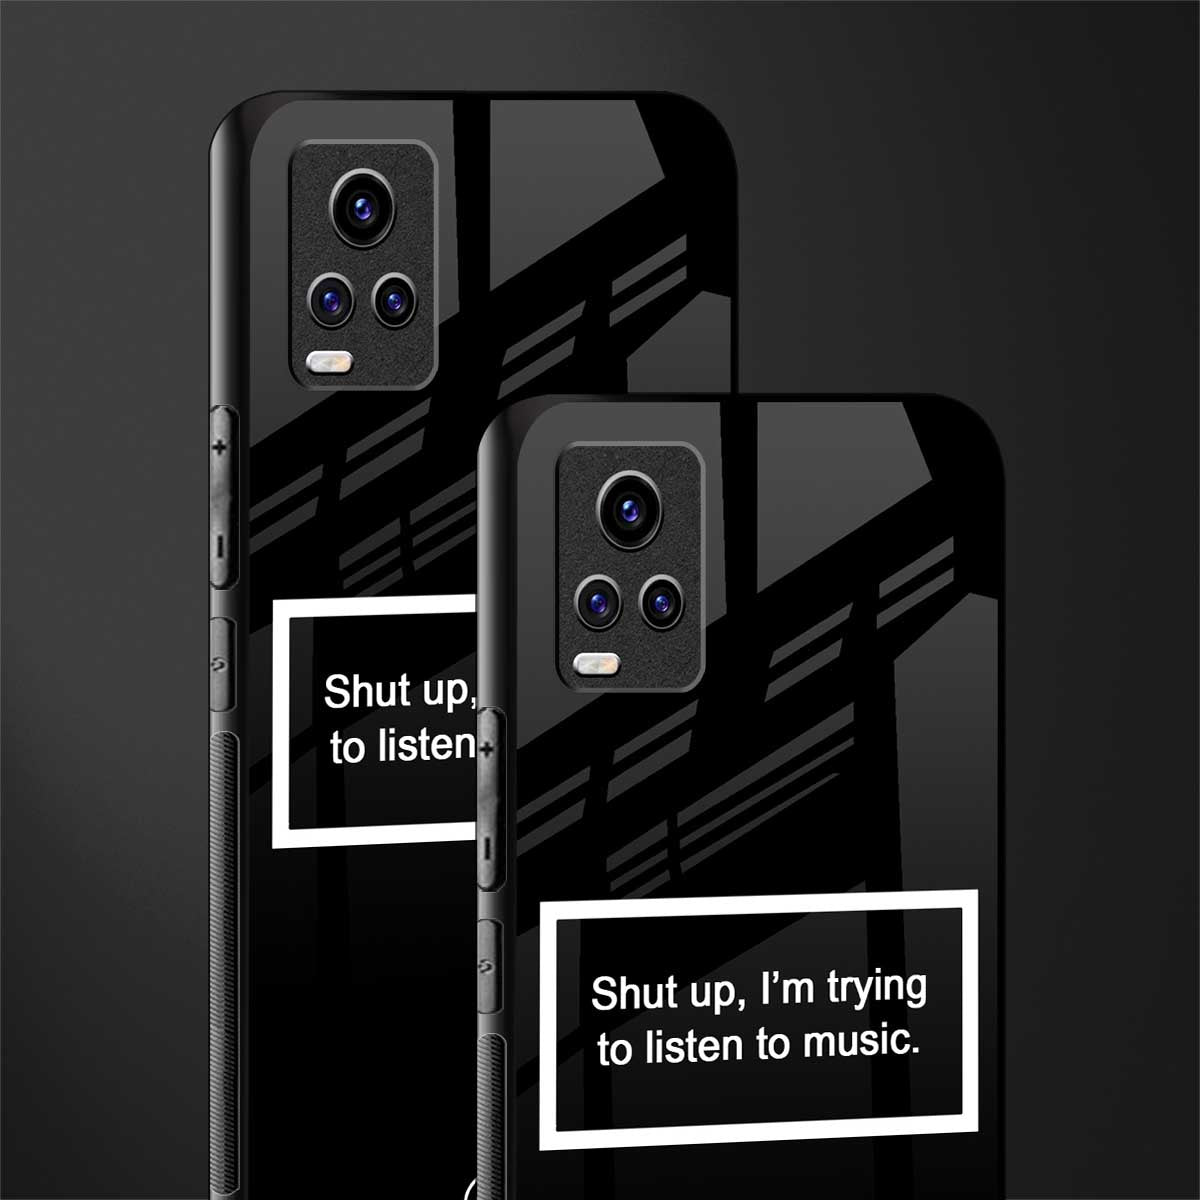 shut up and listen to music black back phone cover | glass case for vivo y73